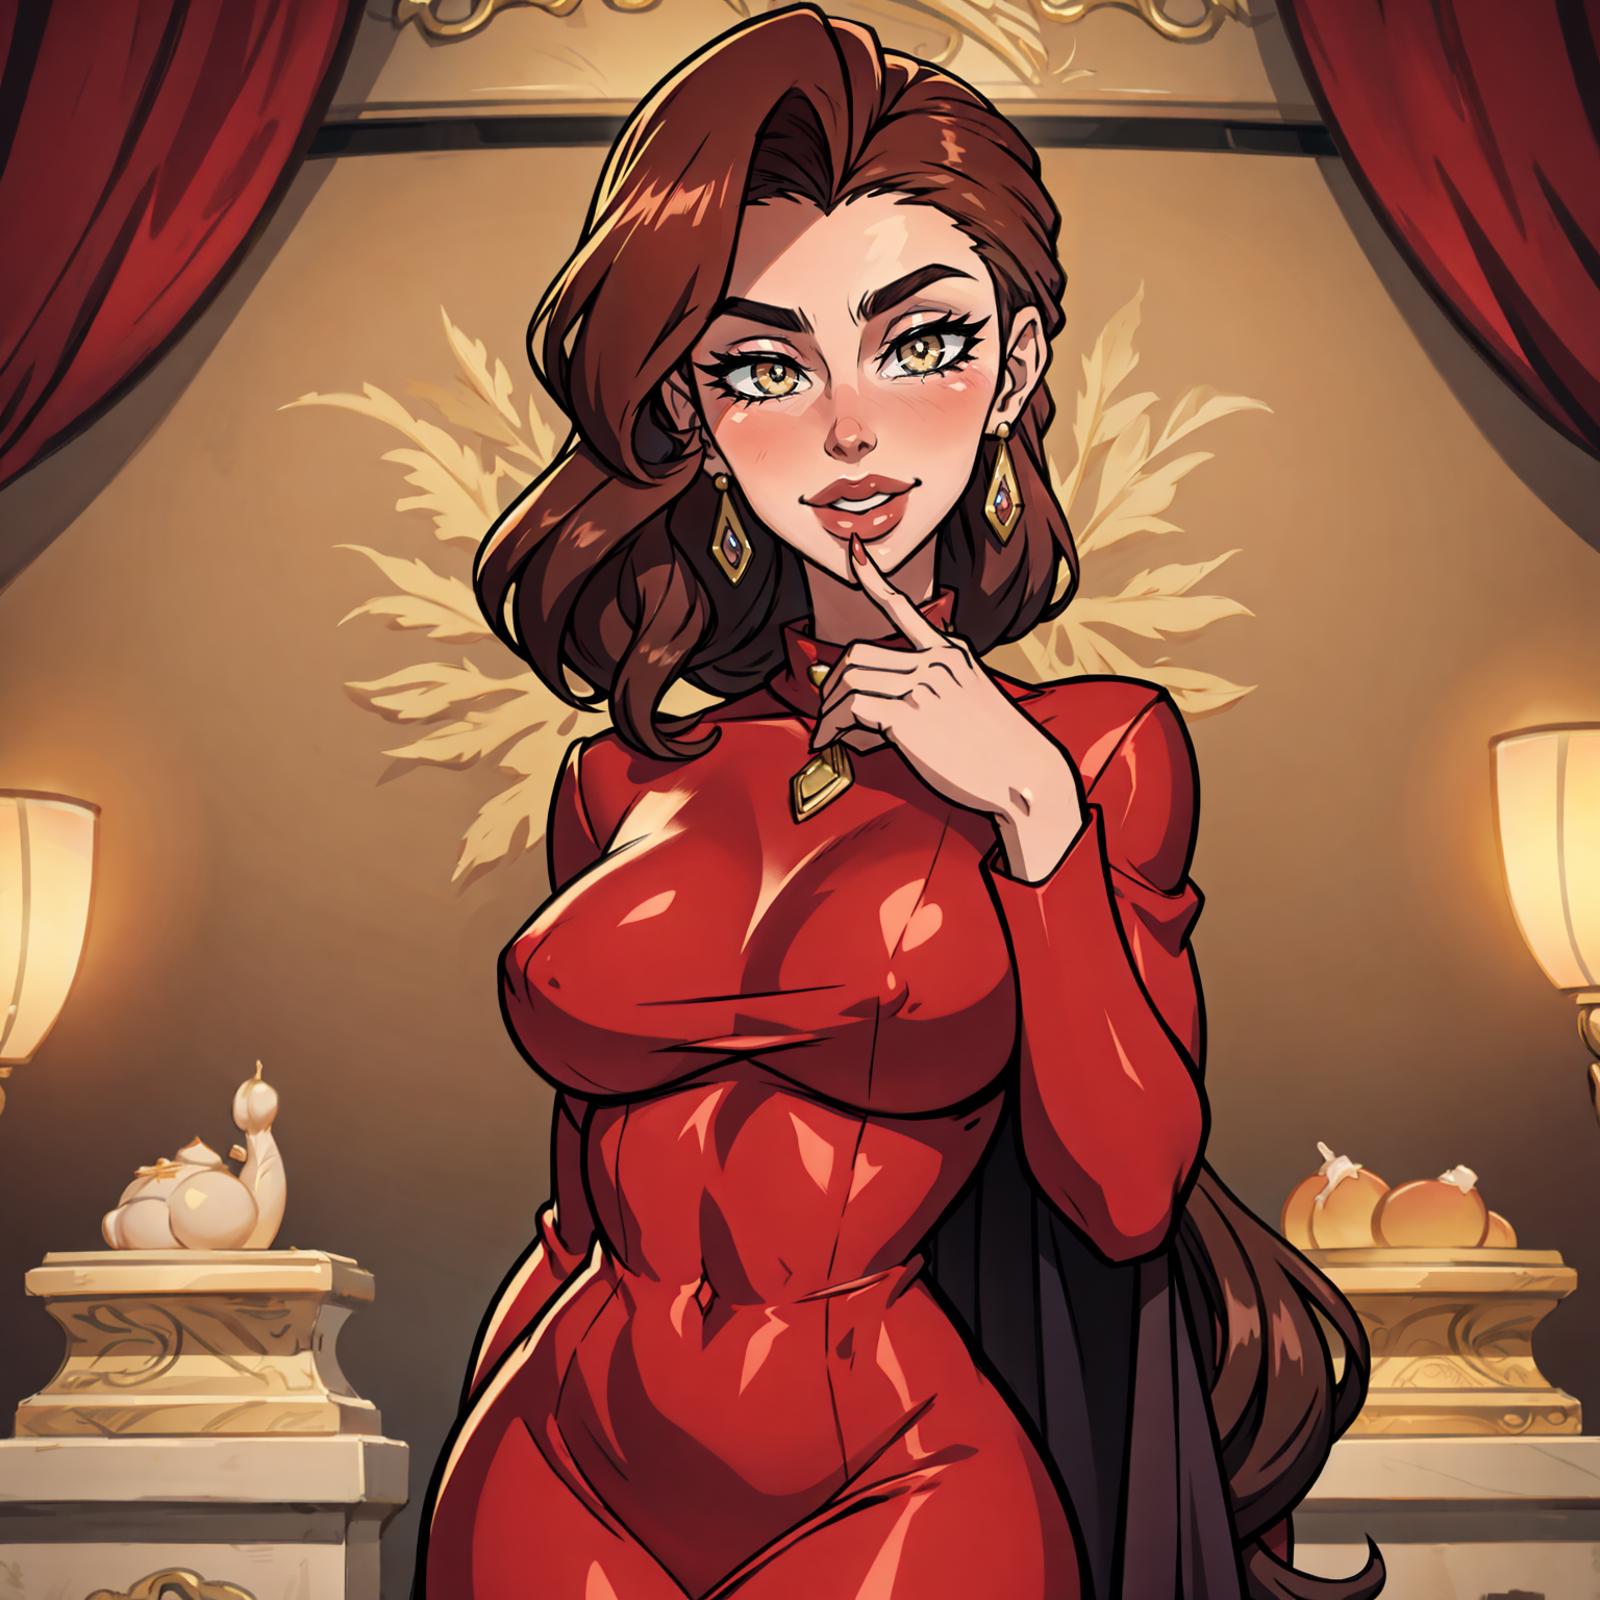 A Female Cartoon Character Wearing Red Lingerie and Pointing at Her Tongue.